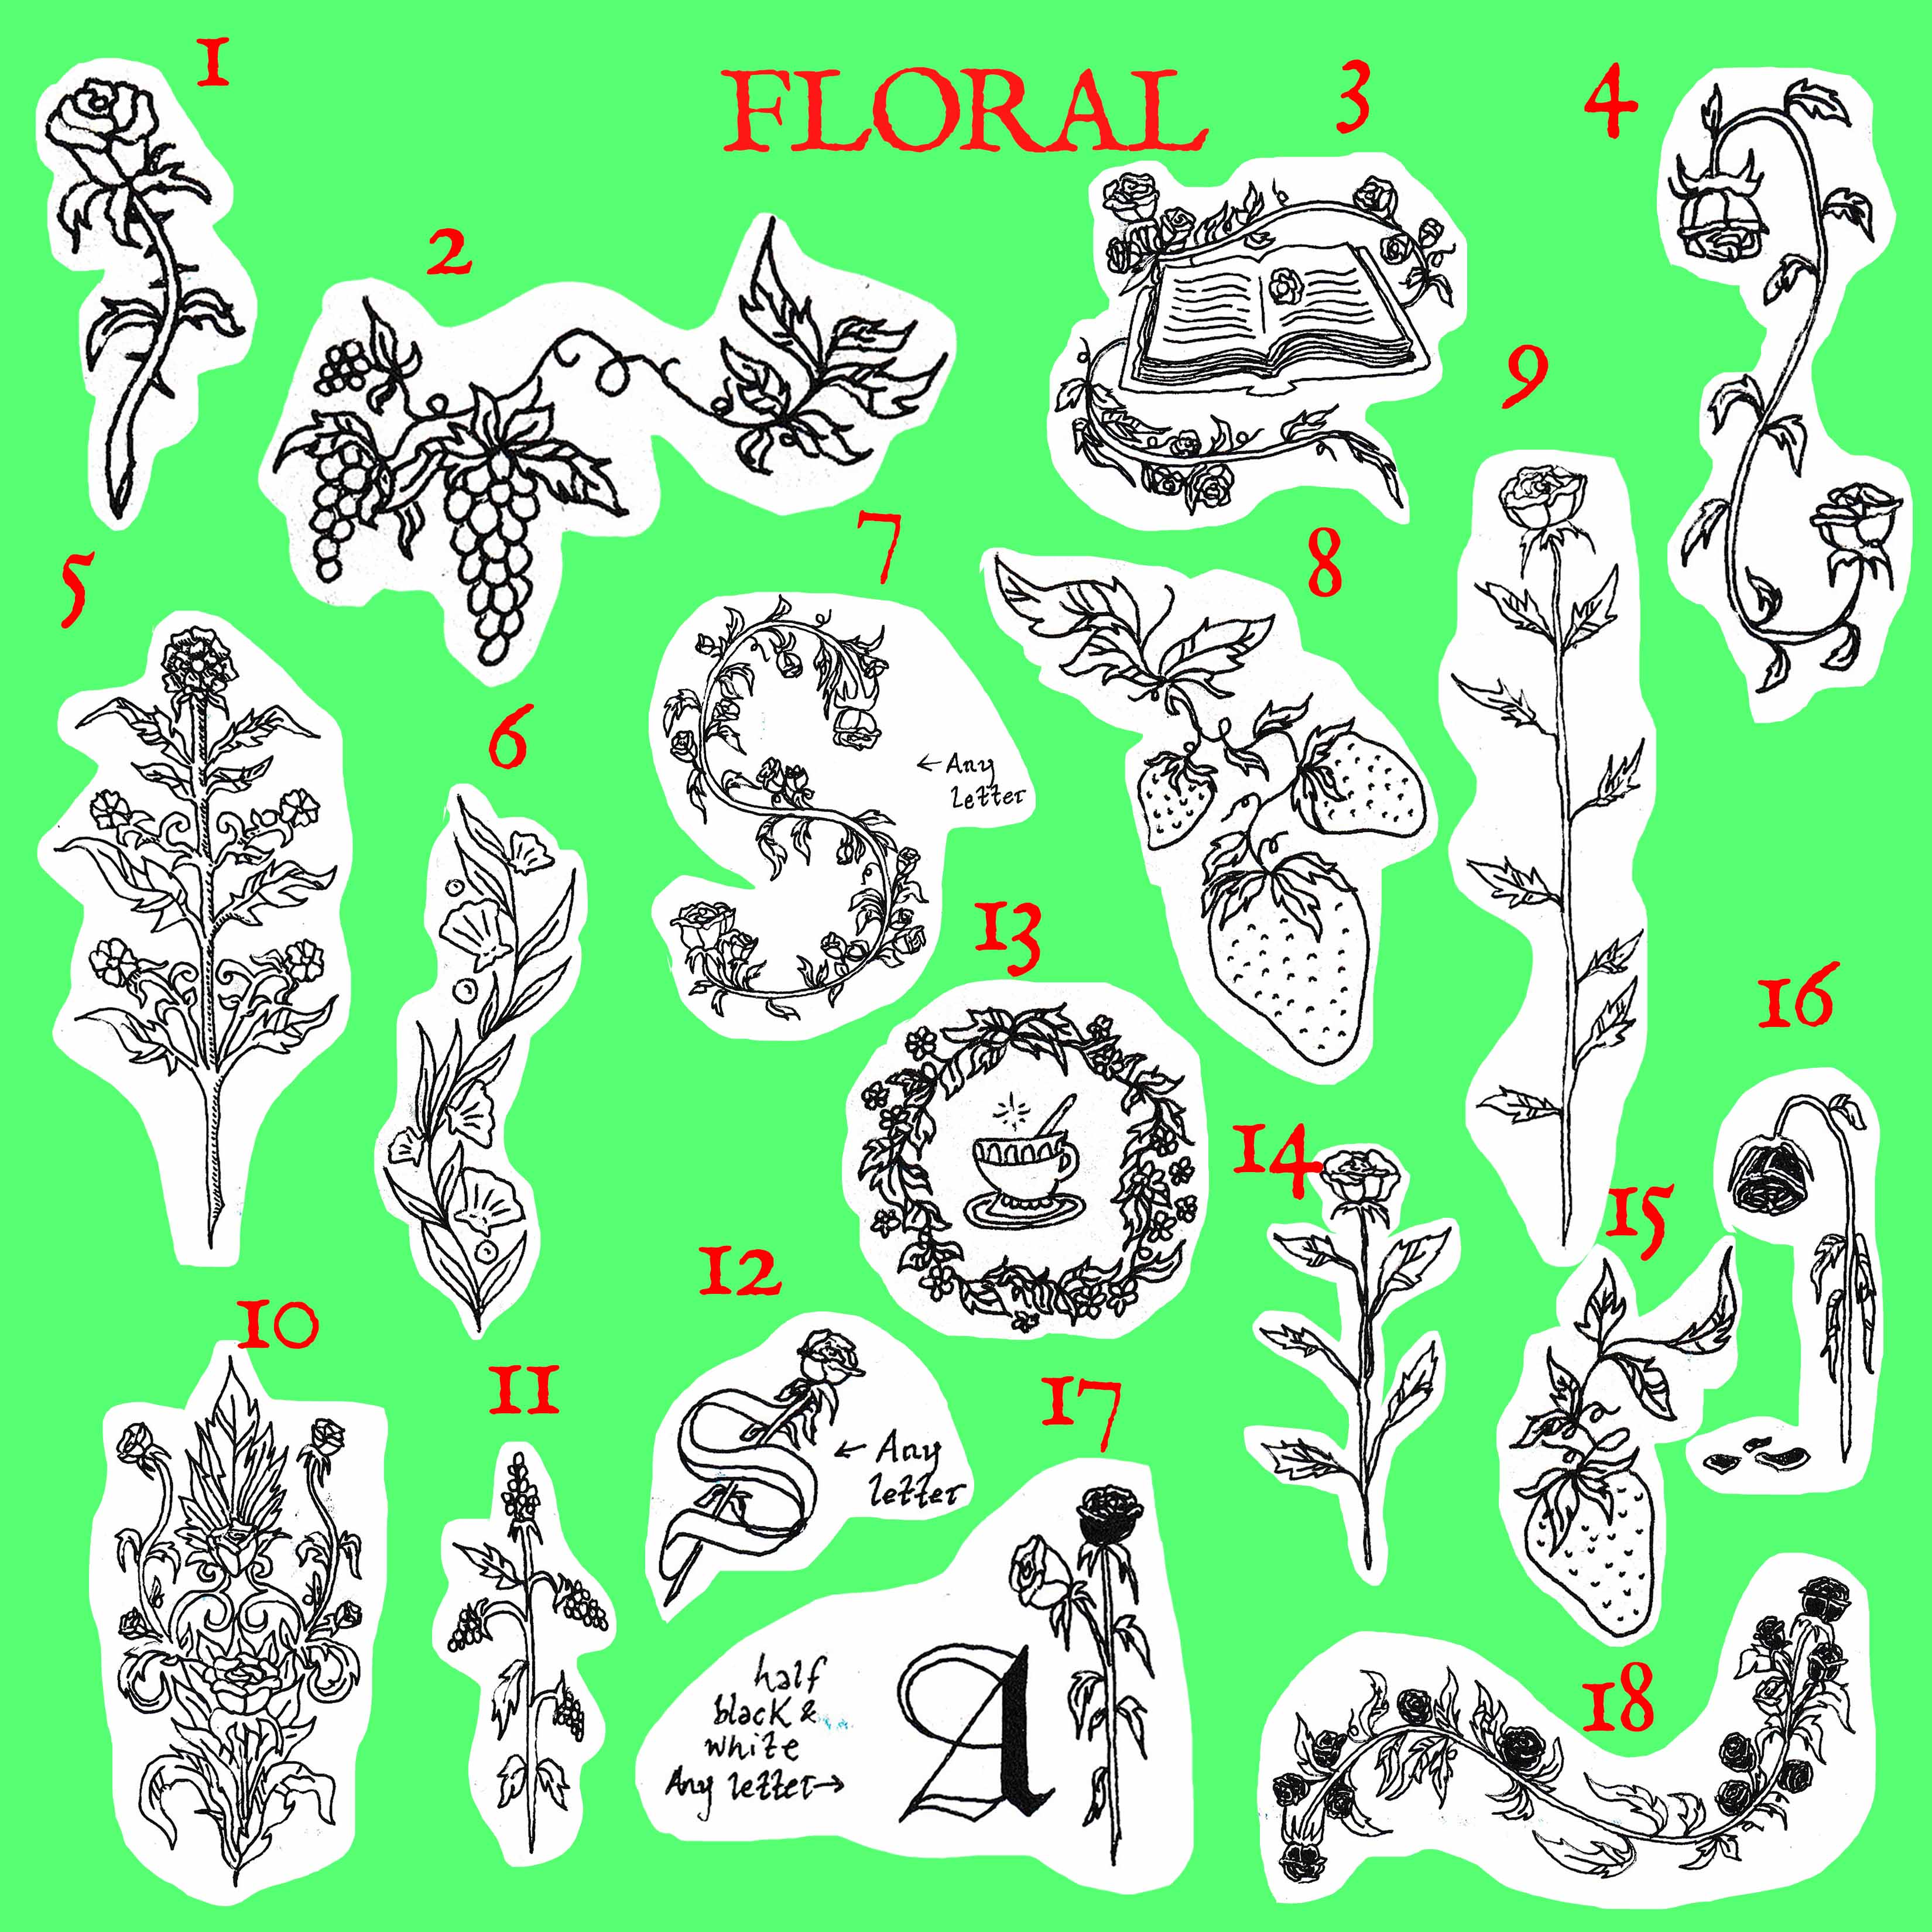 
01-thorny rose, 02-grapes, 03-book and flowers, 04-curved roses, 05-ornamented flower stem<br>
06-seashell kelp, 07-big rose letter, 08-strawberries, 09-tall rose,<br> 10-ornamented rose shield, 11-grape stalk, 12-small rose letter <br>
13-tea wreath, 14-short stem rose, 15-single berry, 16-black rose,<br> 17-black and white rose letter, 18-black rose string
